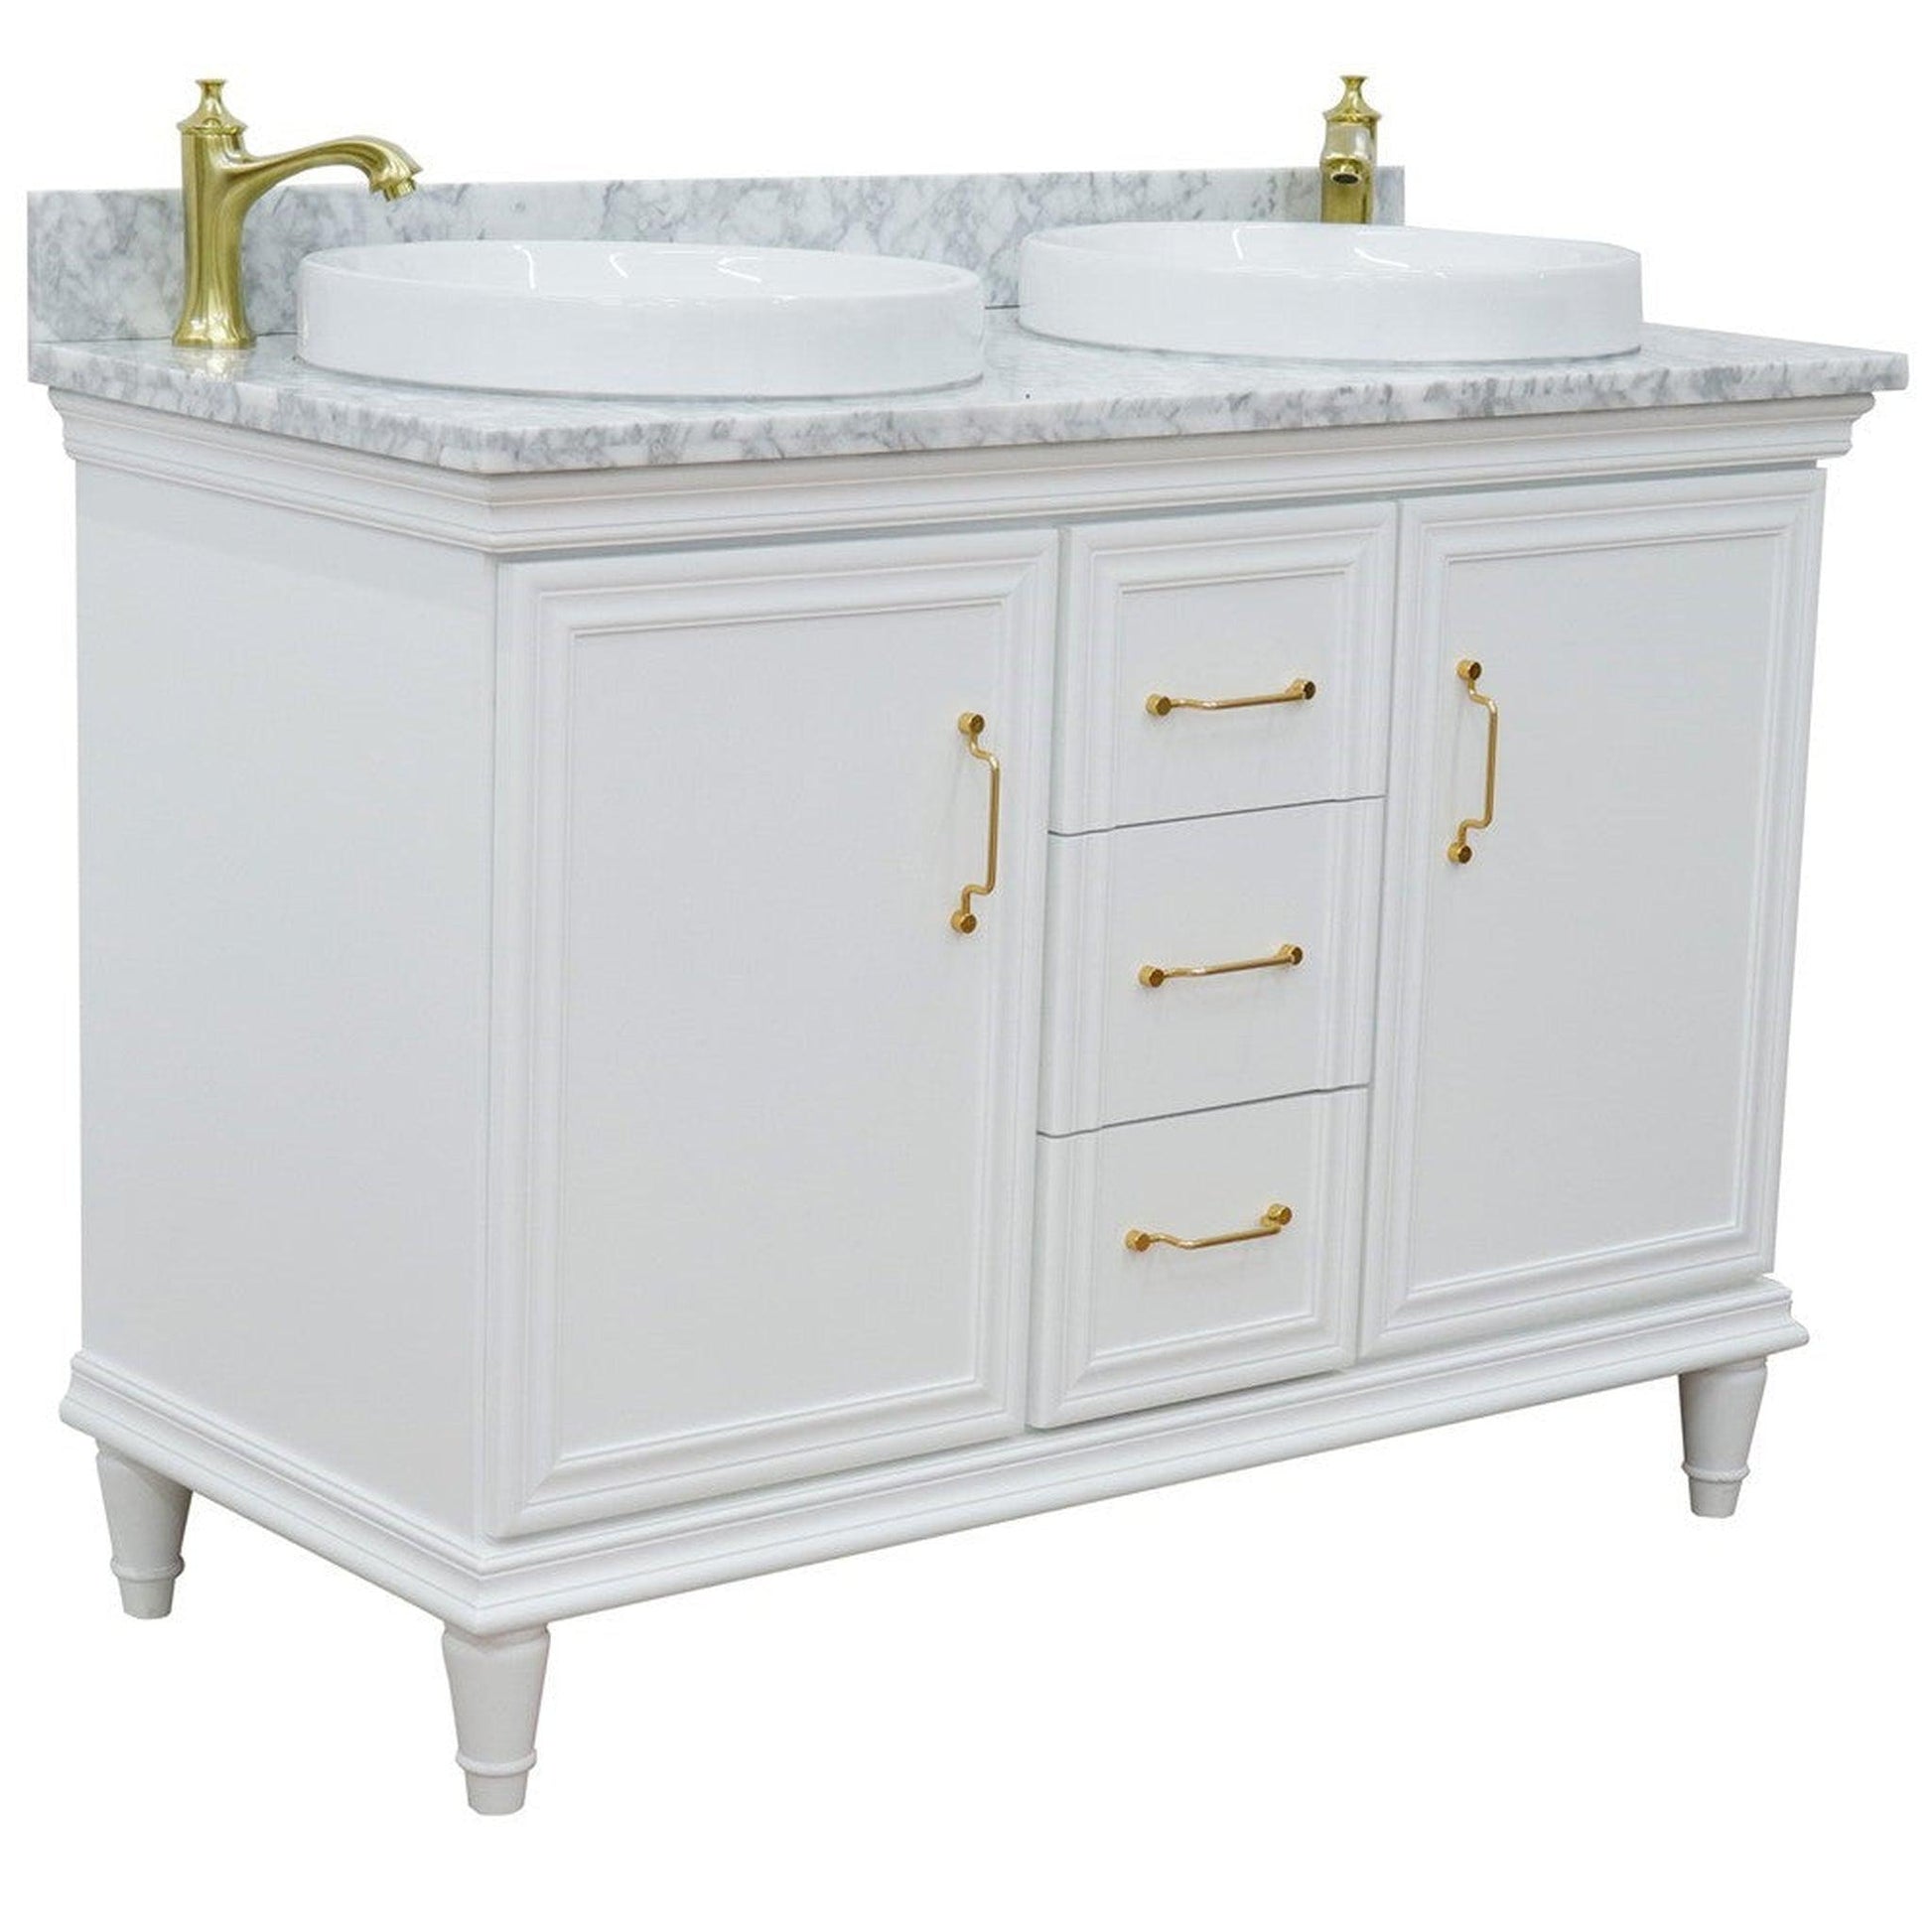 Bellaterra Home Forli 49" 2-Door 3-Drawer White Freestanding Vanity Set With Ceramic Double Vessel Sink and White Carrara Marble Top